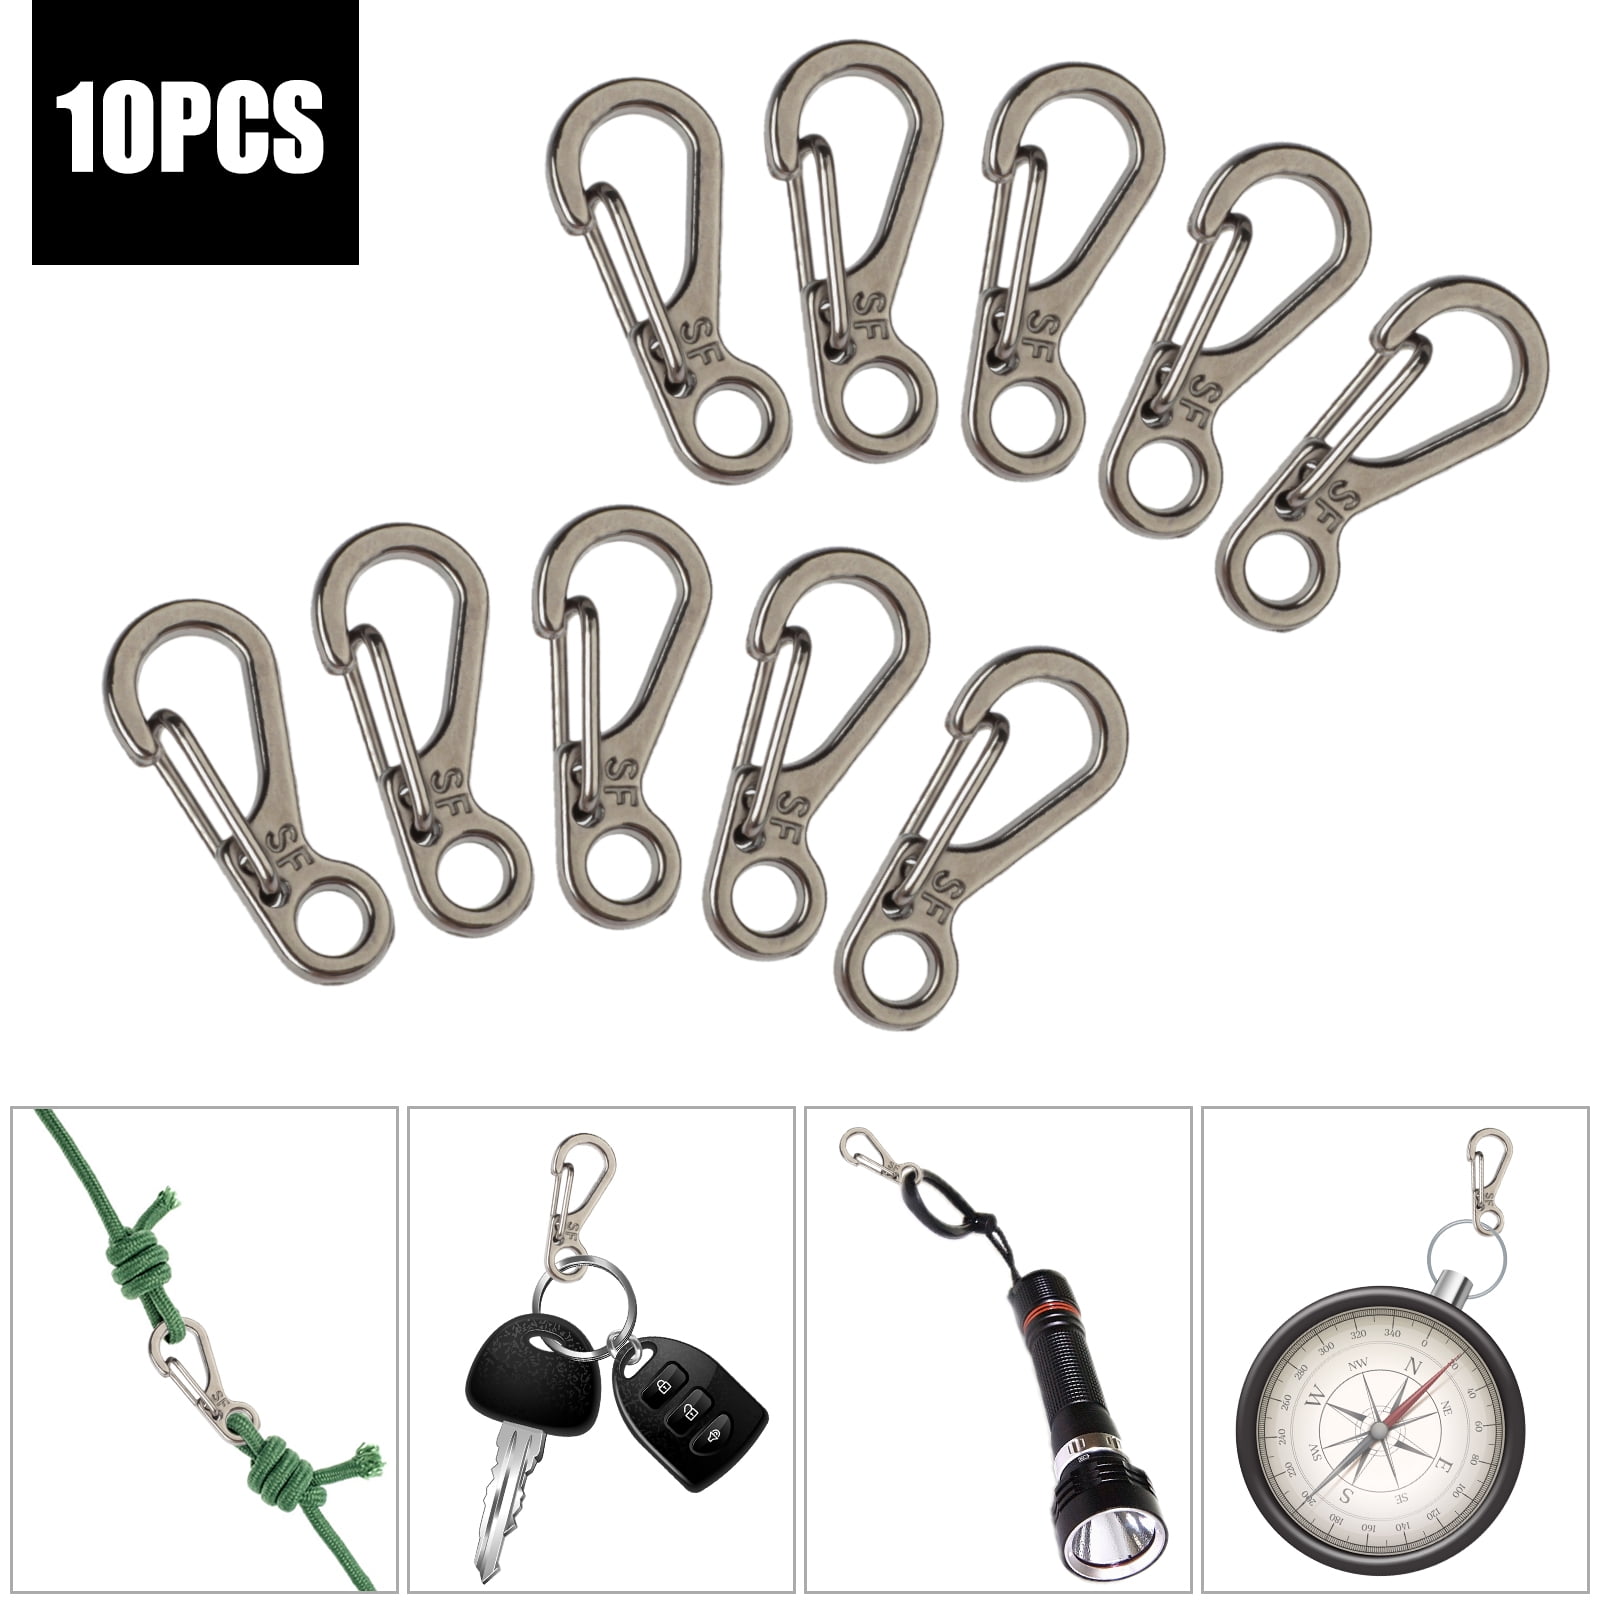 10Pcs Metal Keychain Snap Hooks Buckle Carabiner Camping Hiking Spring Clip 